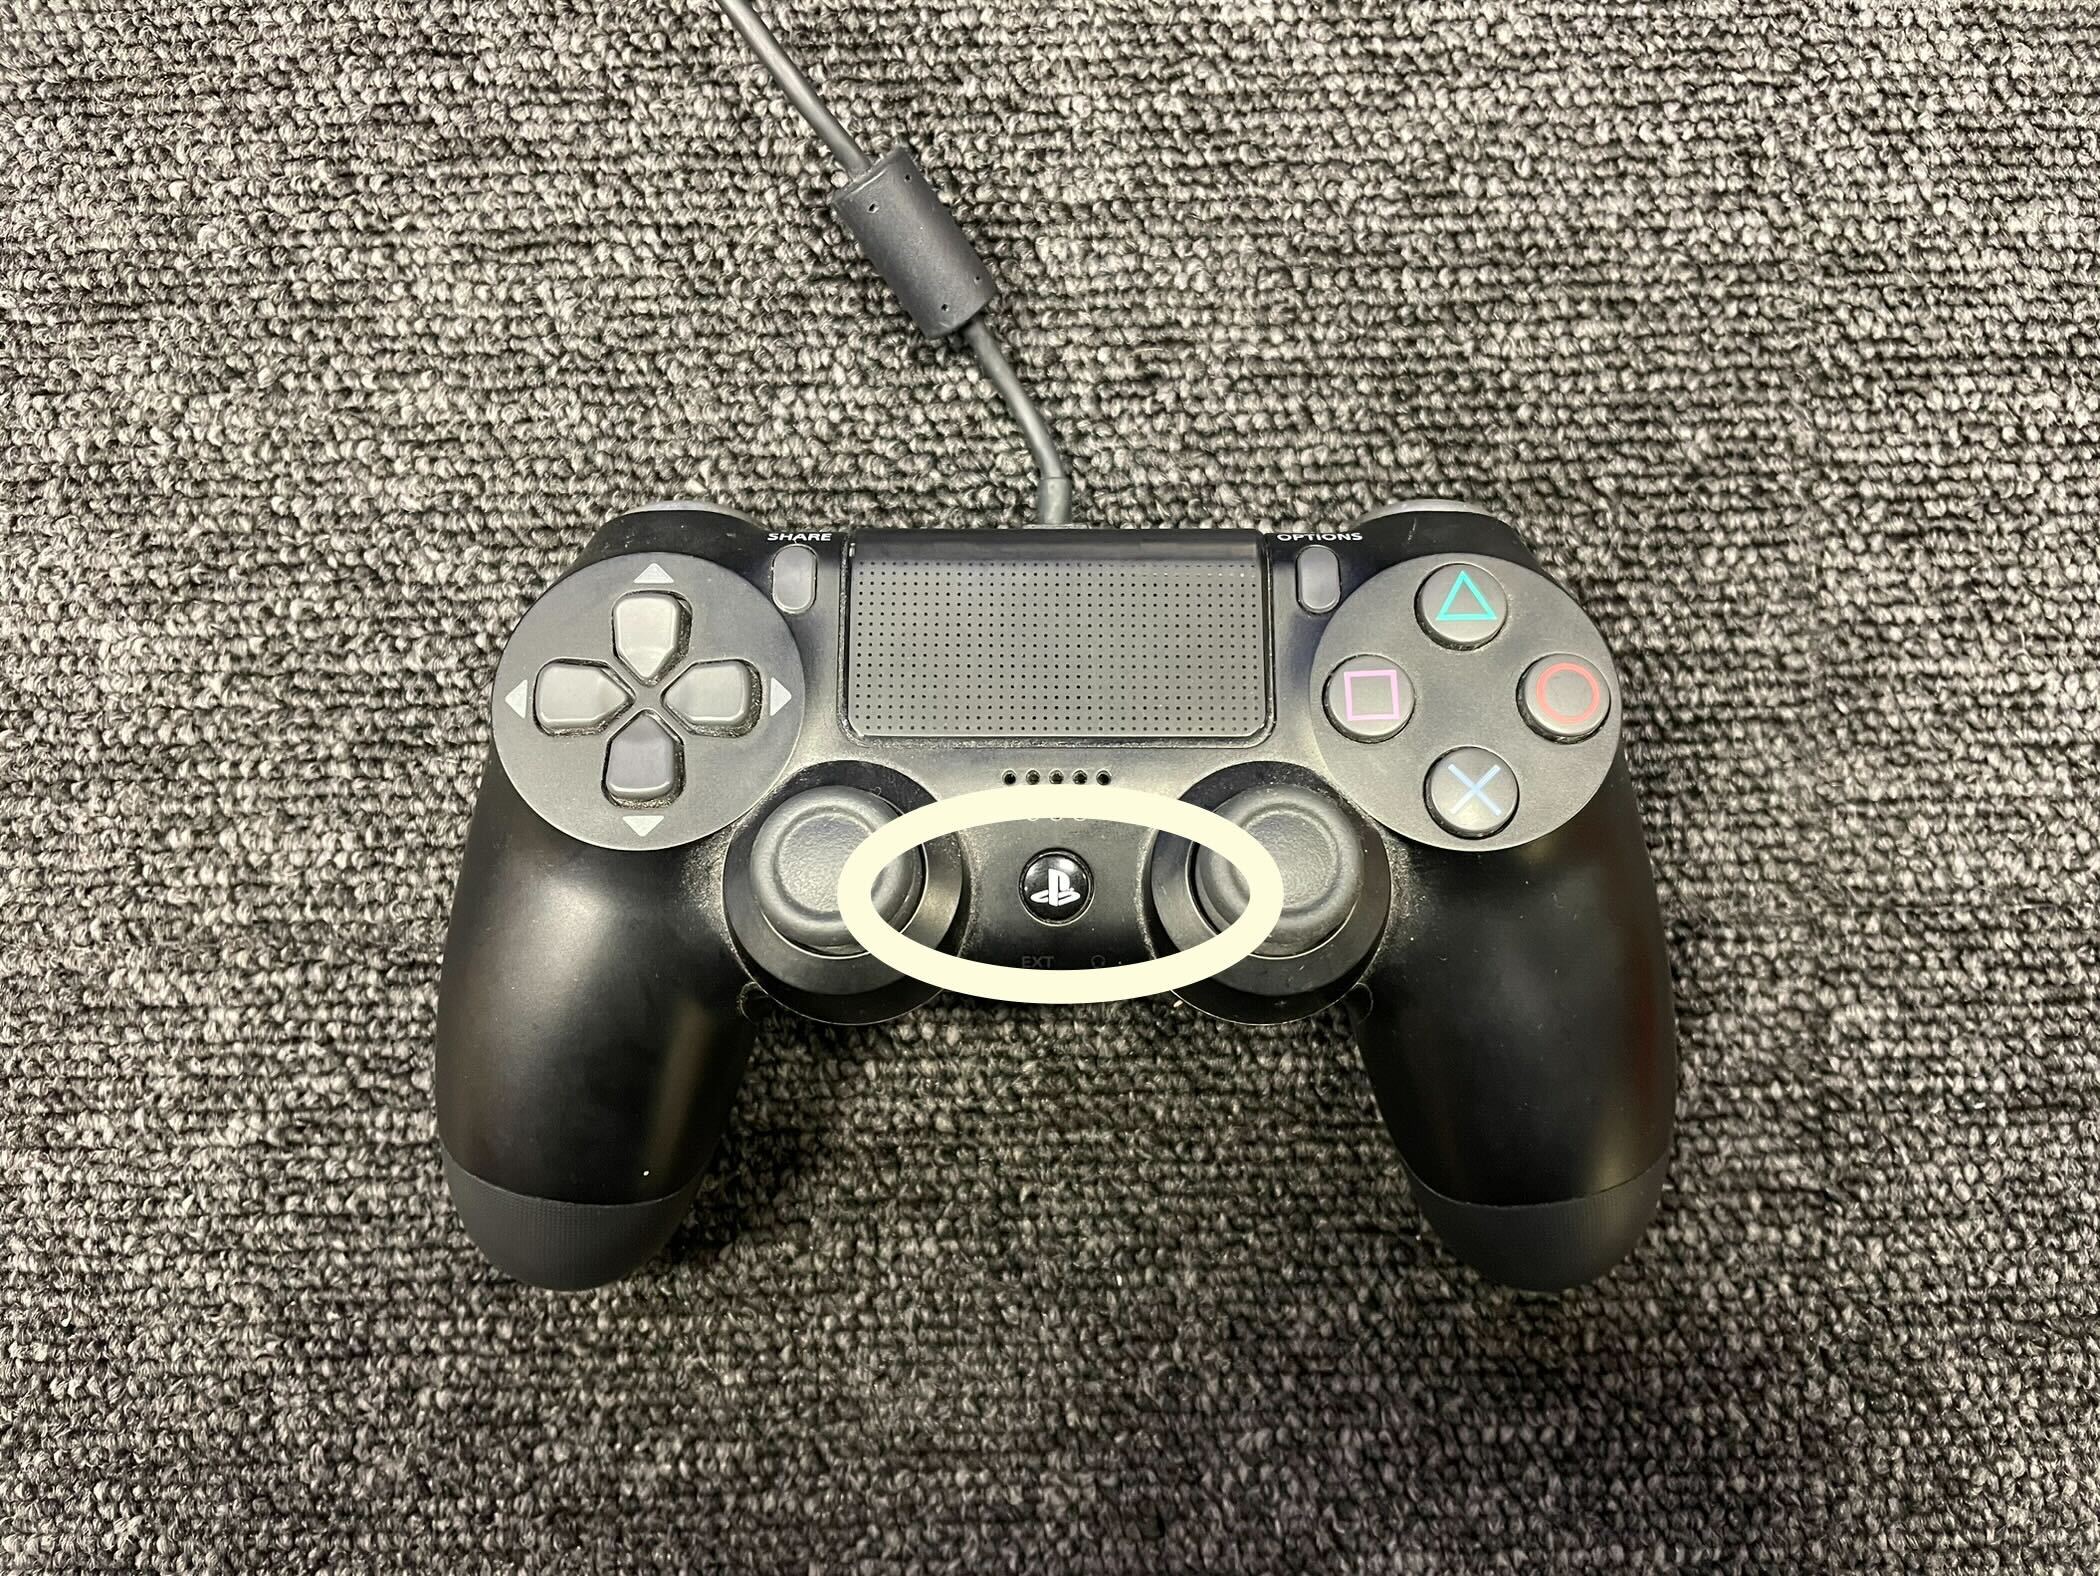 The PS button on the PS4 controller